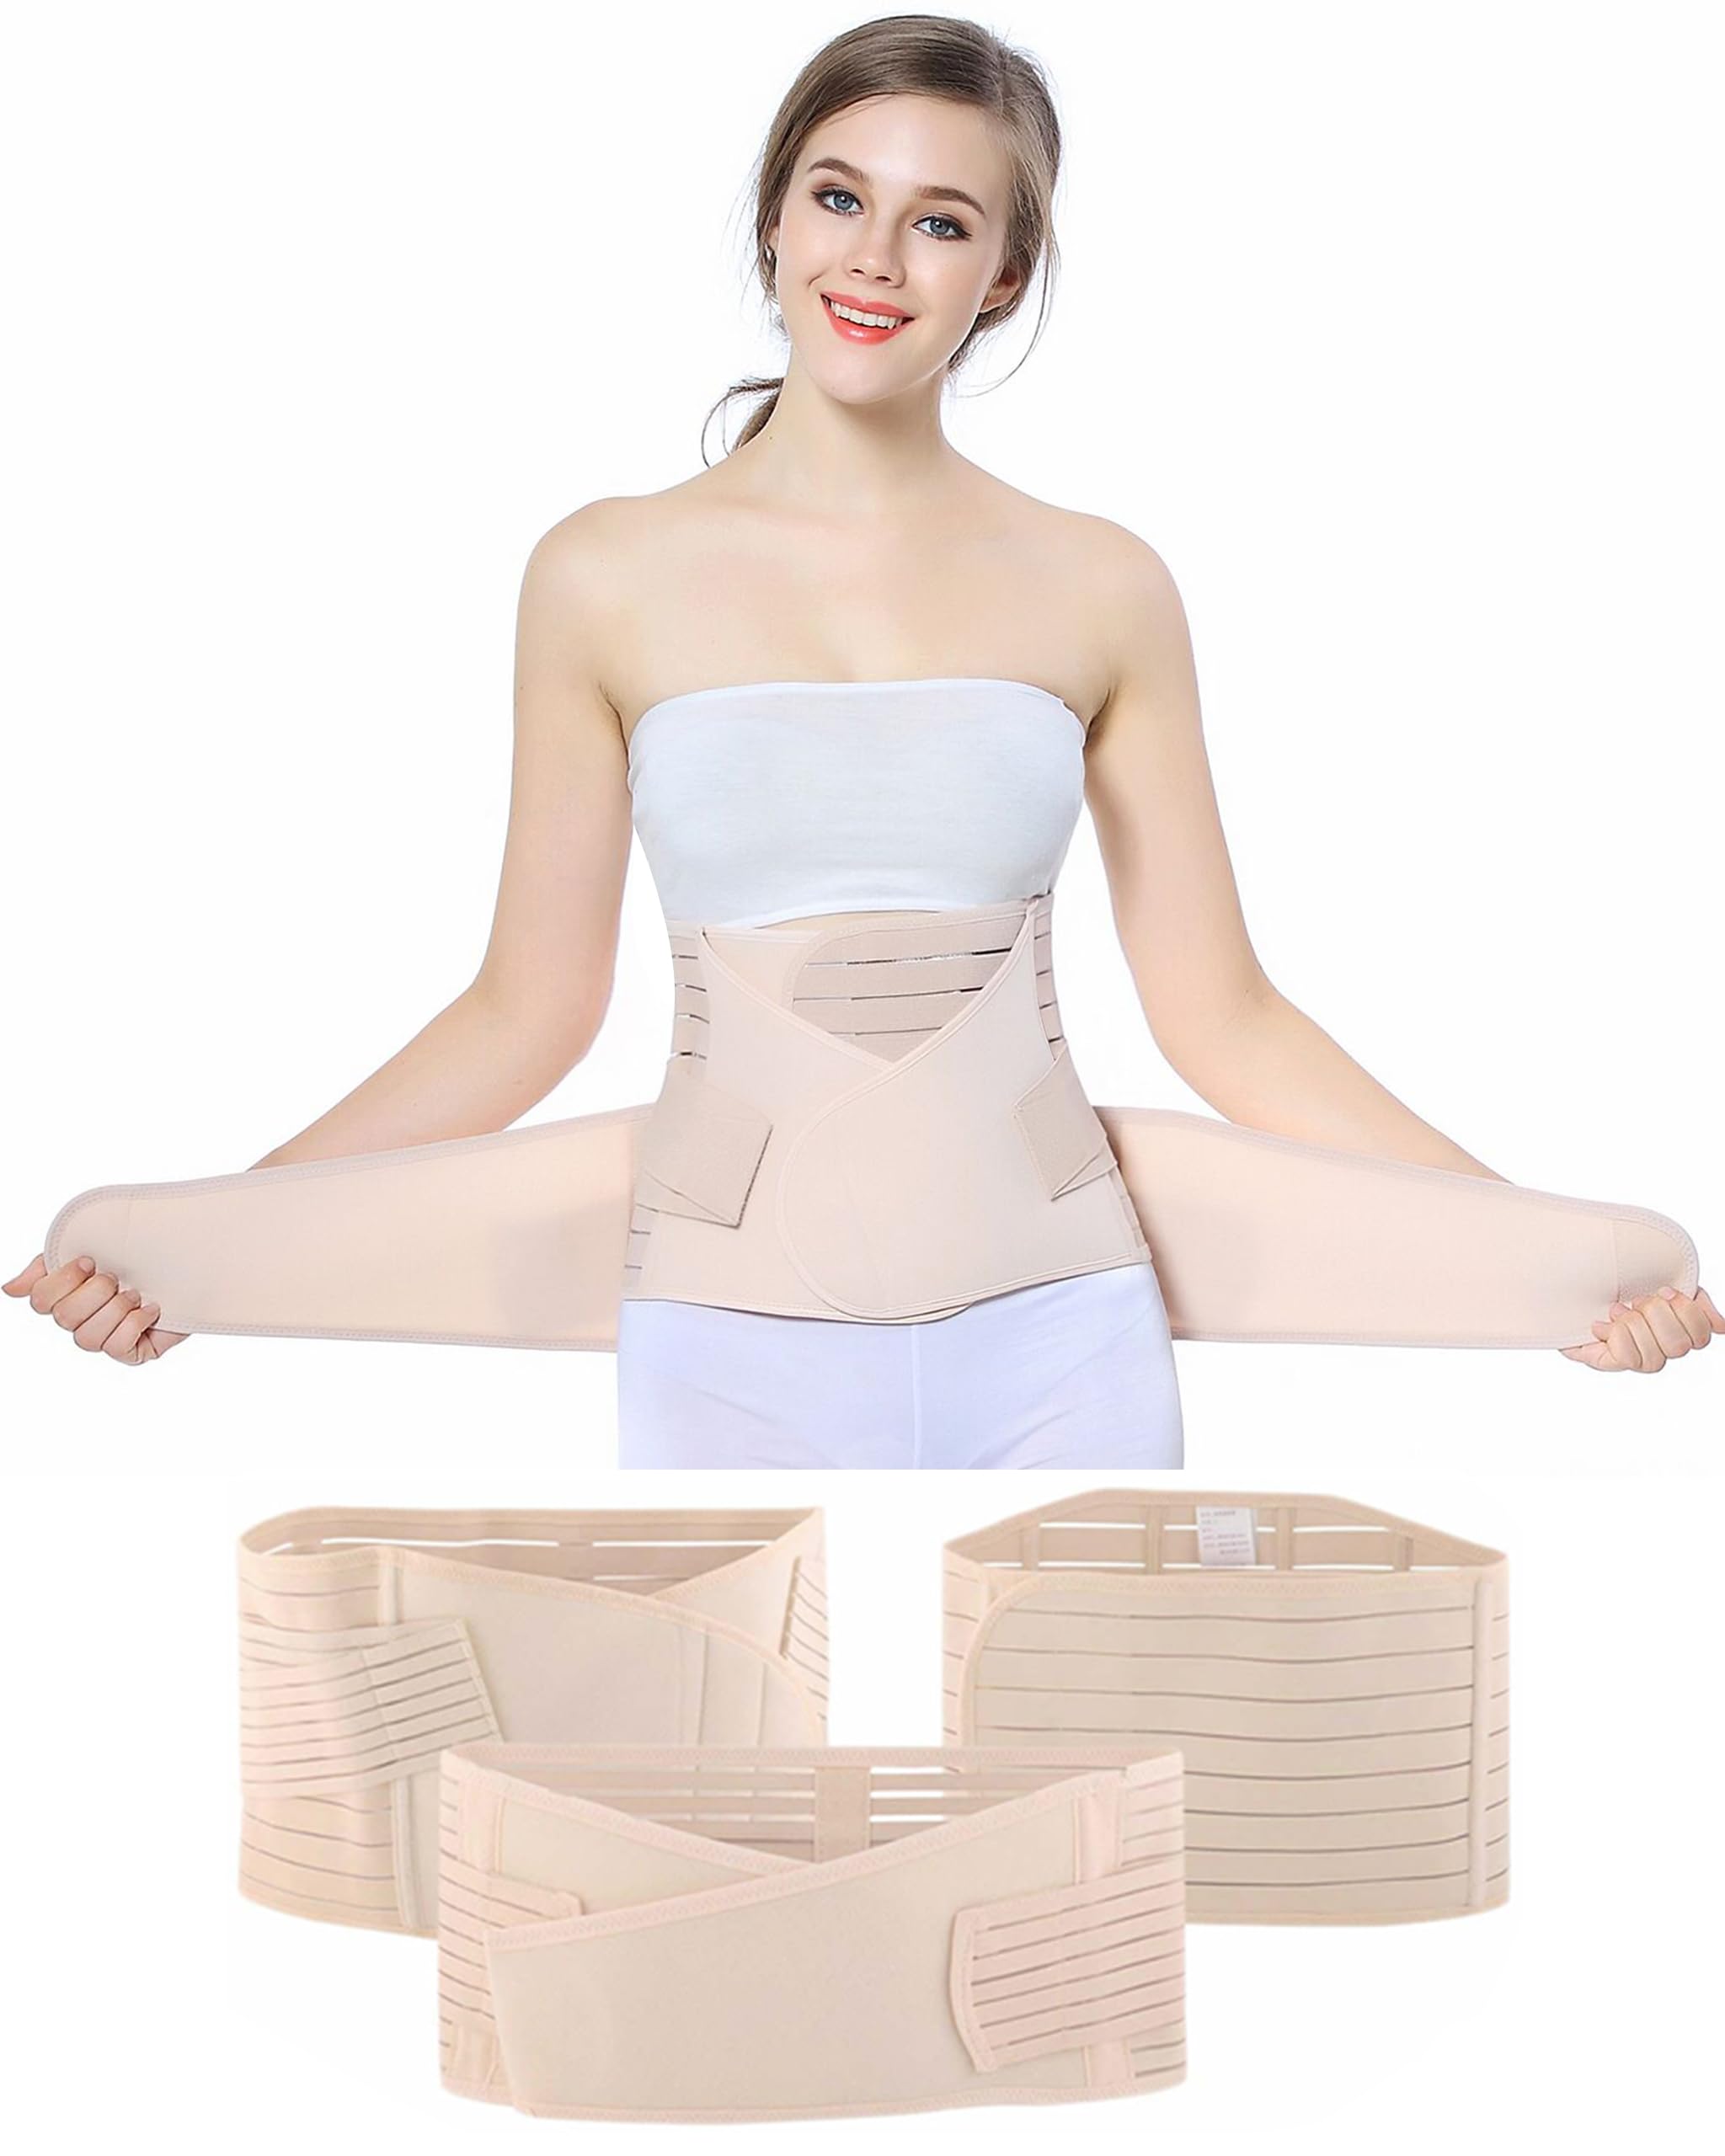 Postpartum Belly Wrap，3 in1 Support Belly Waist Pelvis C Section